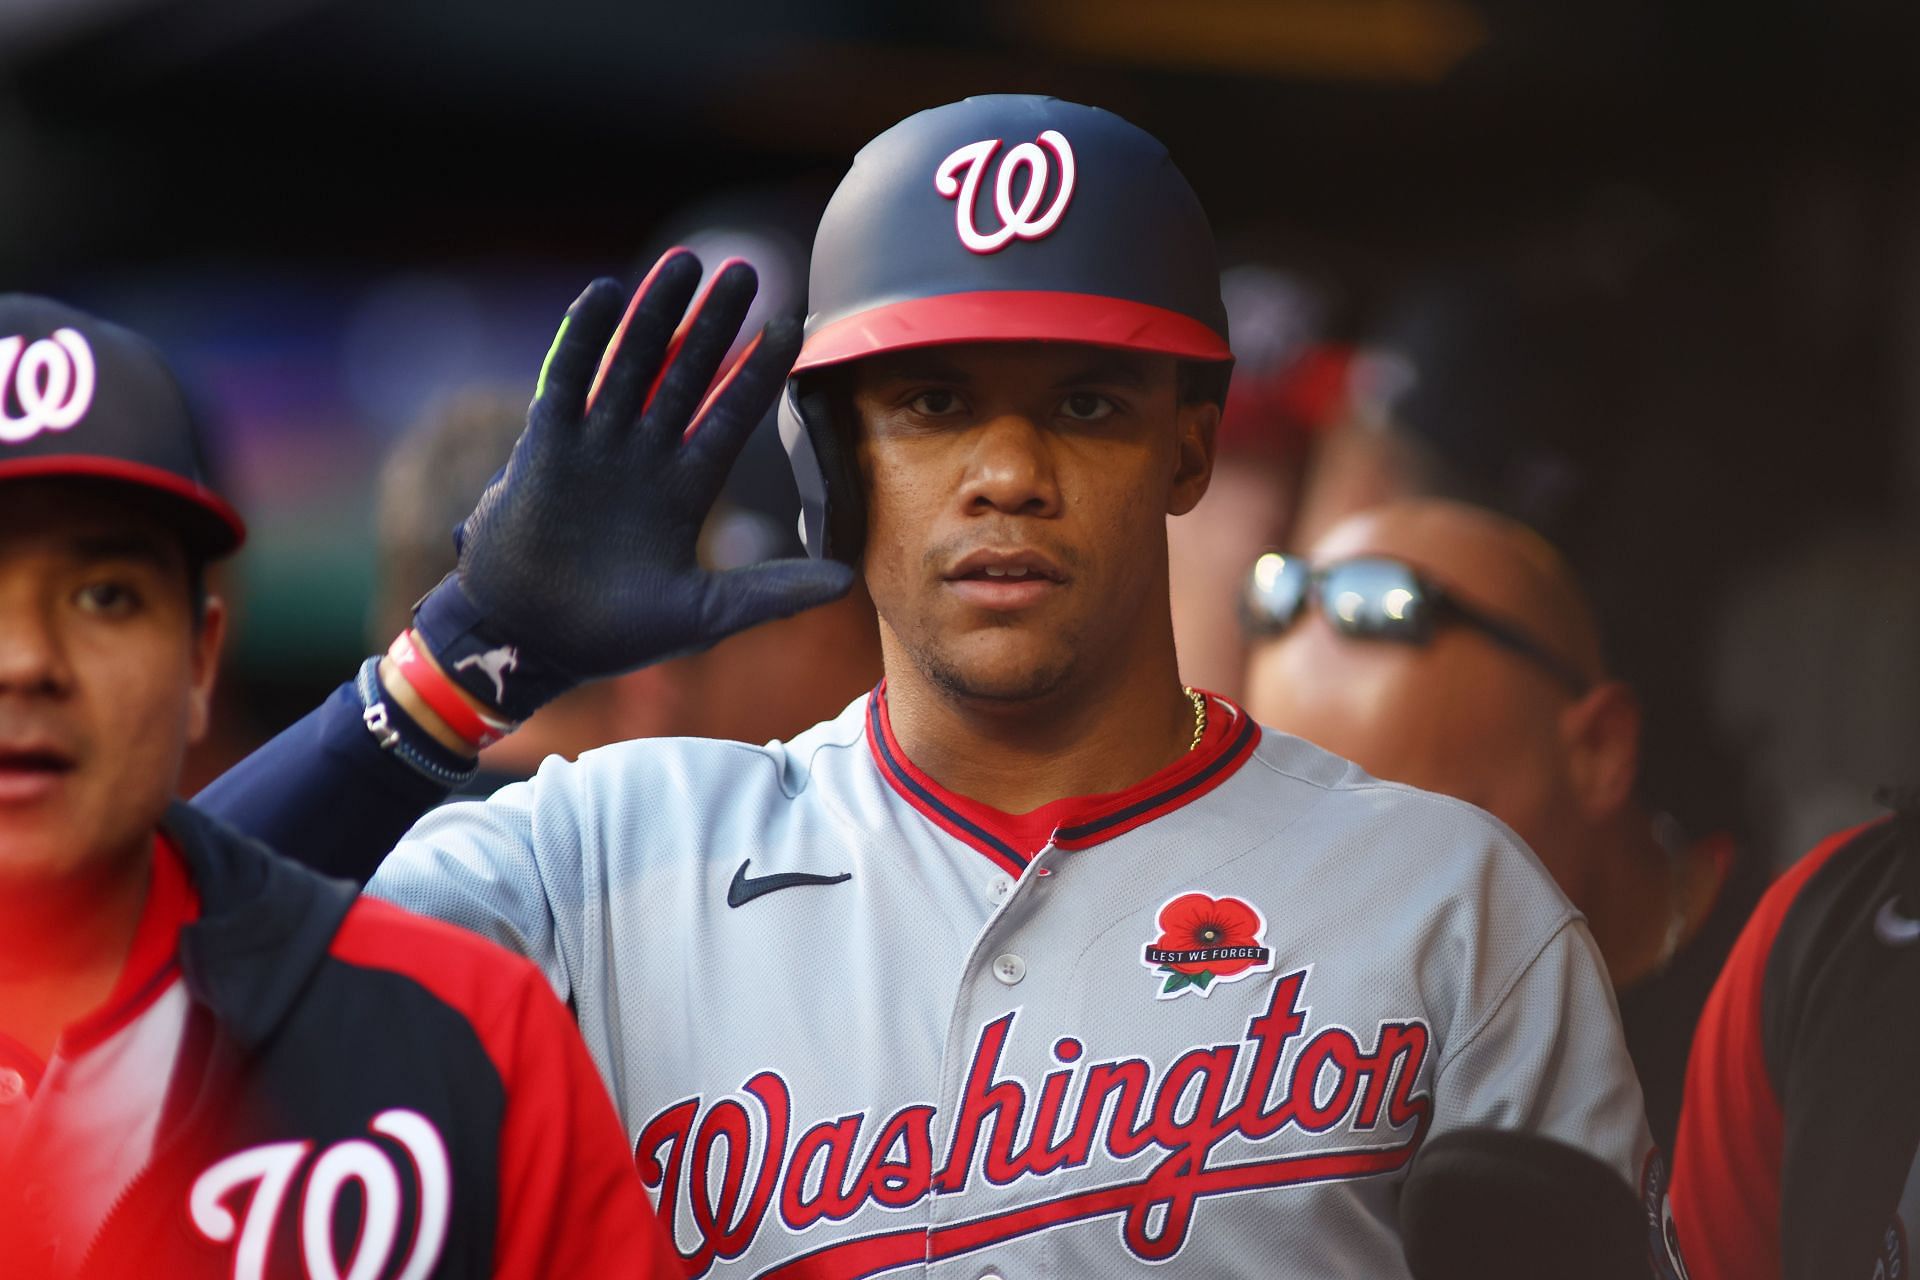 The Nats' big deal is likely to be a sale of their team - MLB Insider Jon  Heyman claims Washington Nationals ownership set to change, Juan Soto  unlikely to leave team